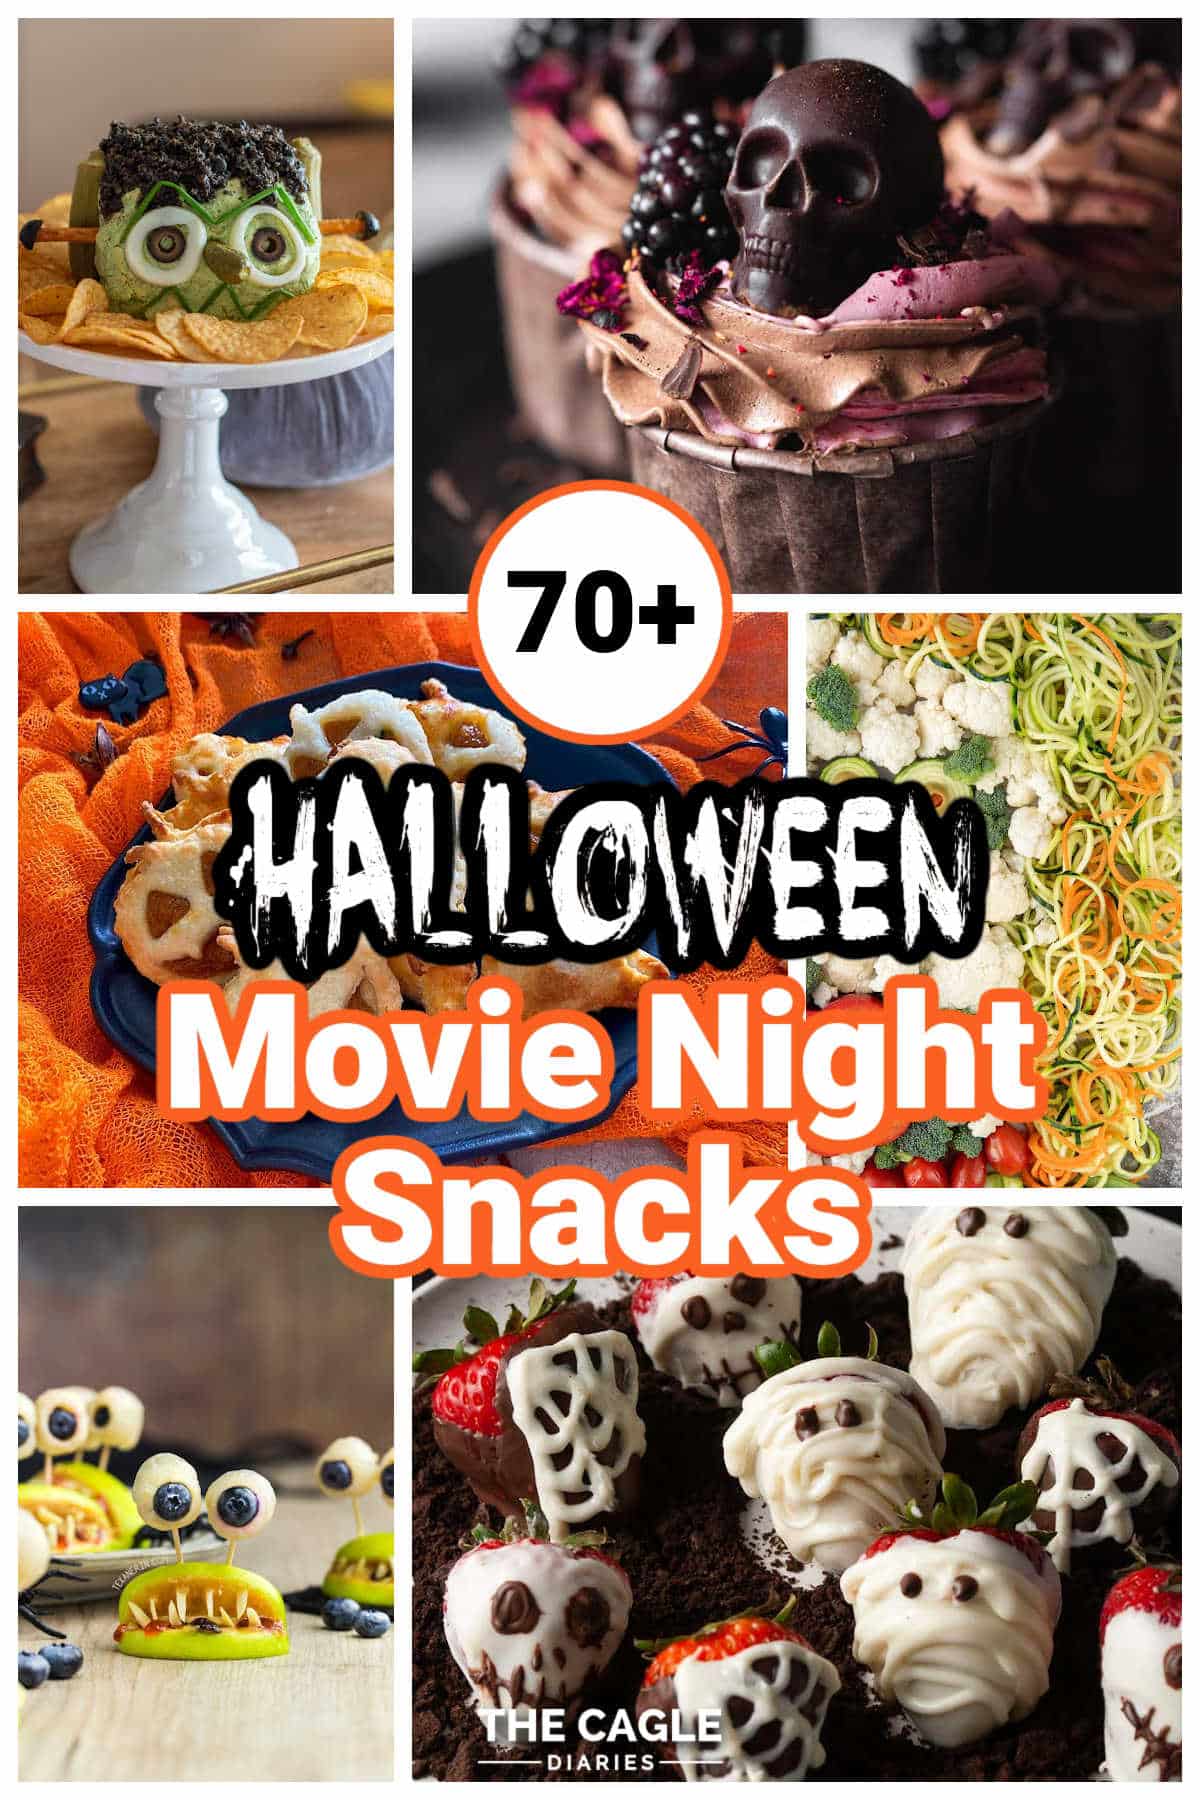 A collage of 6 images showing favorite Halloween Movie Night snacks.